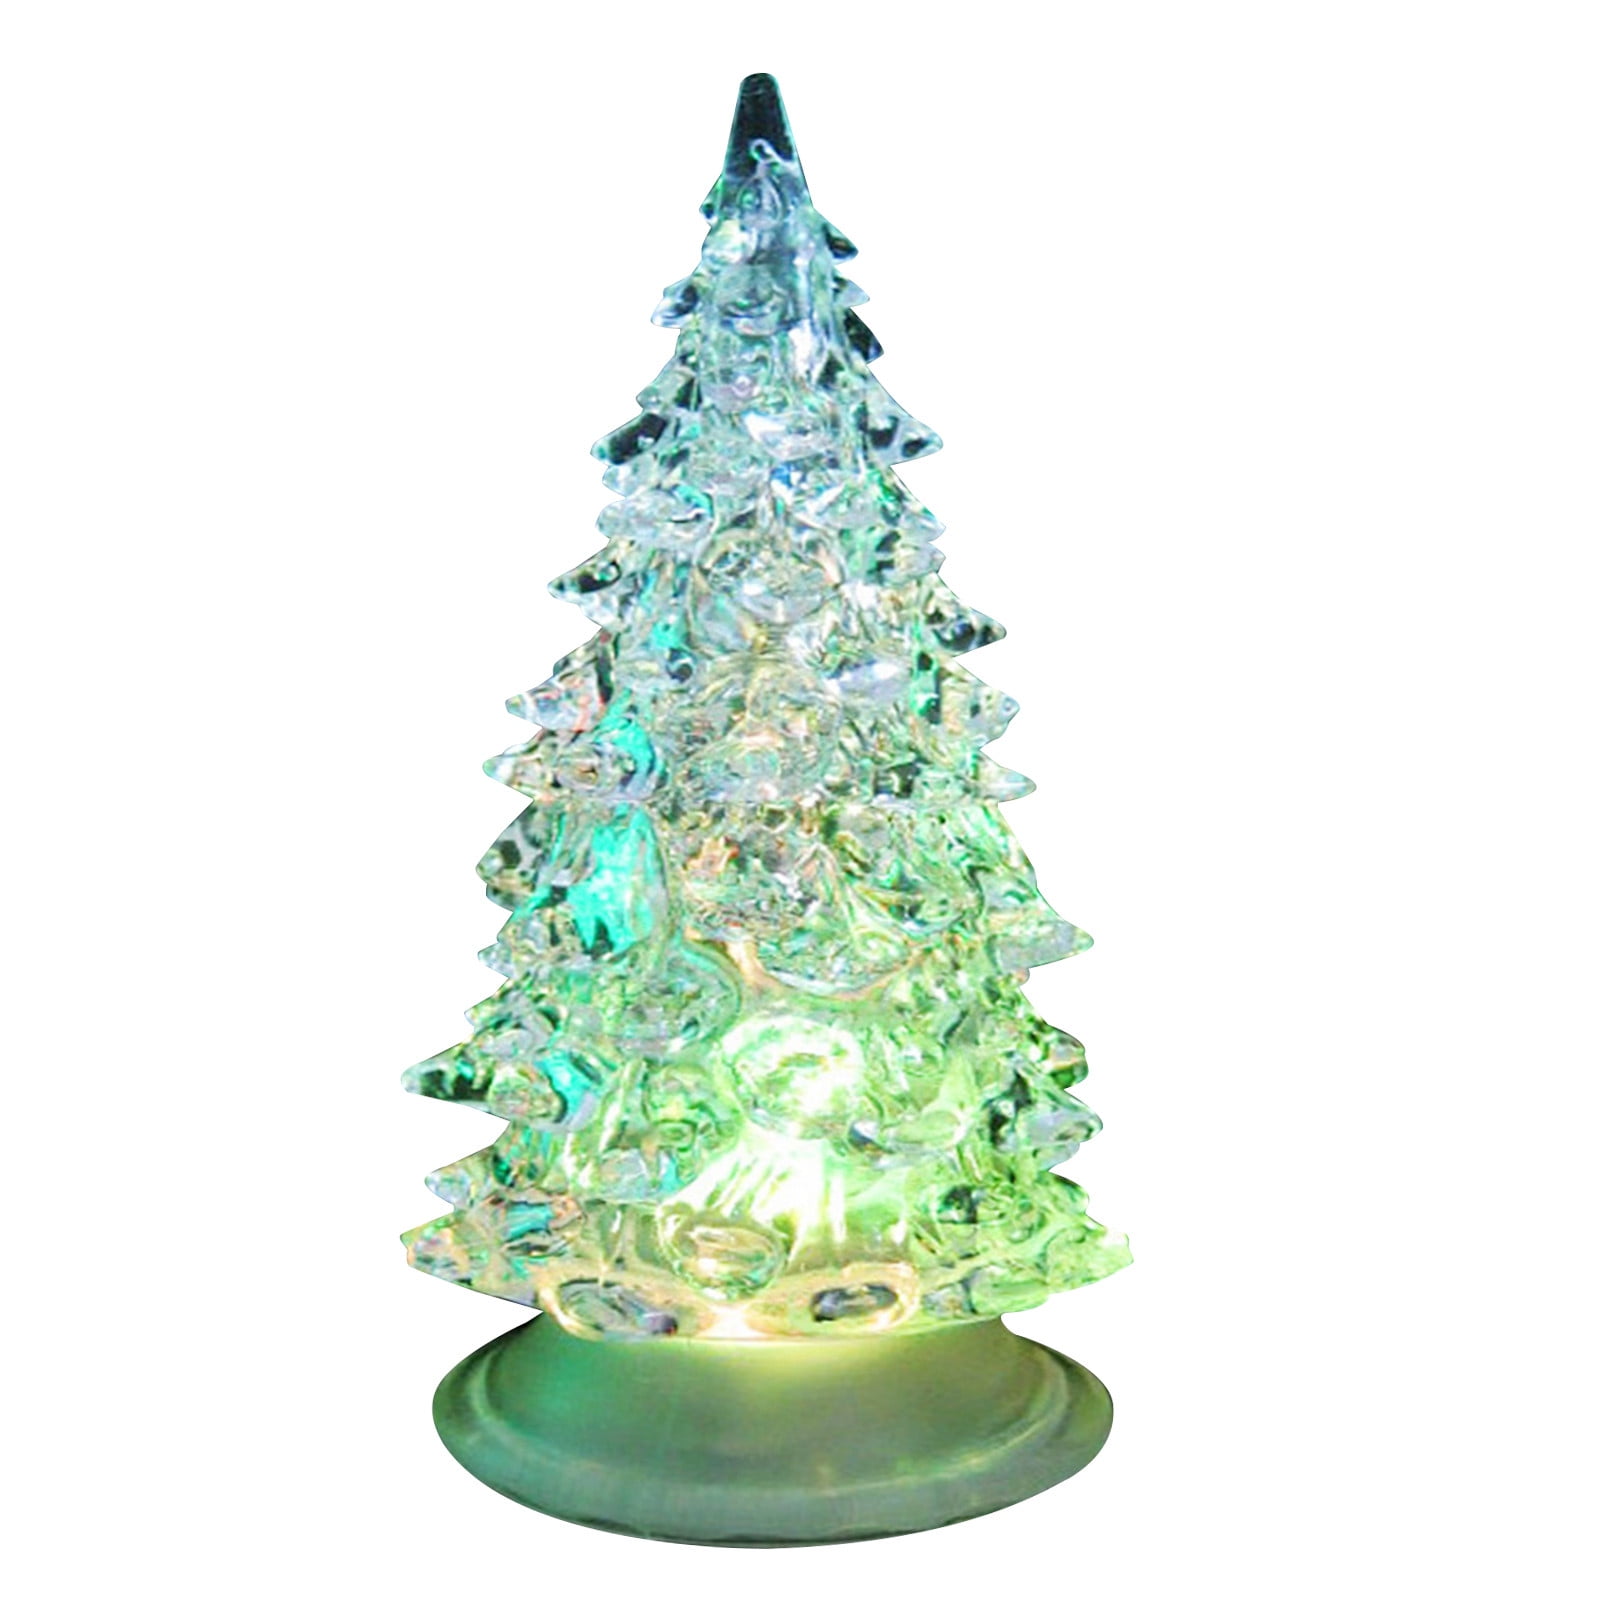 27 FT. Acrylic Crystal Garland Christmas Tree Decorations Sparkly